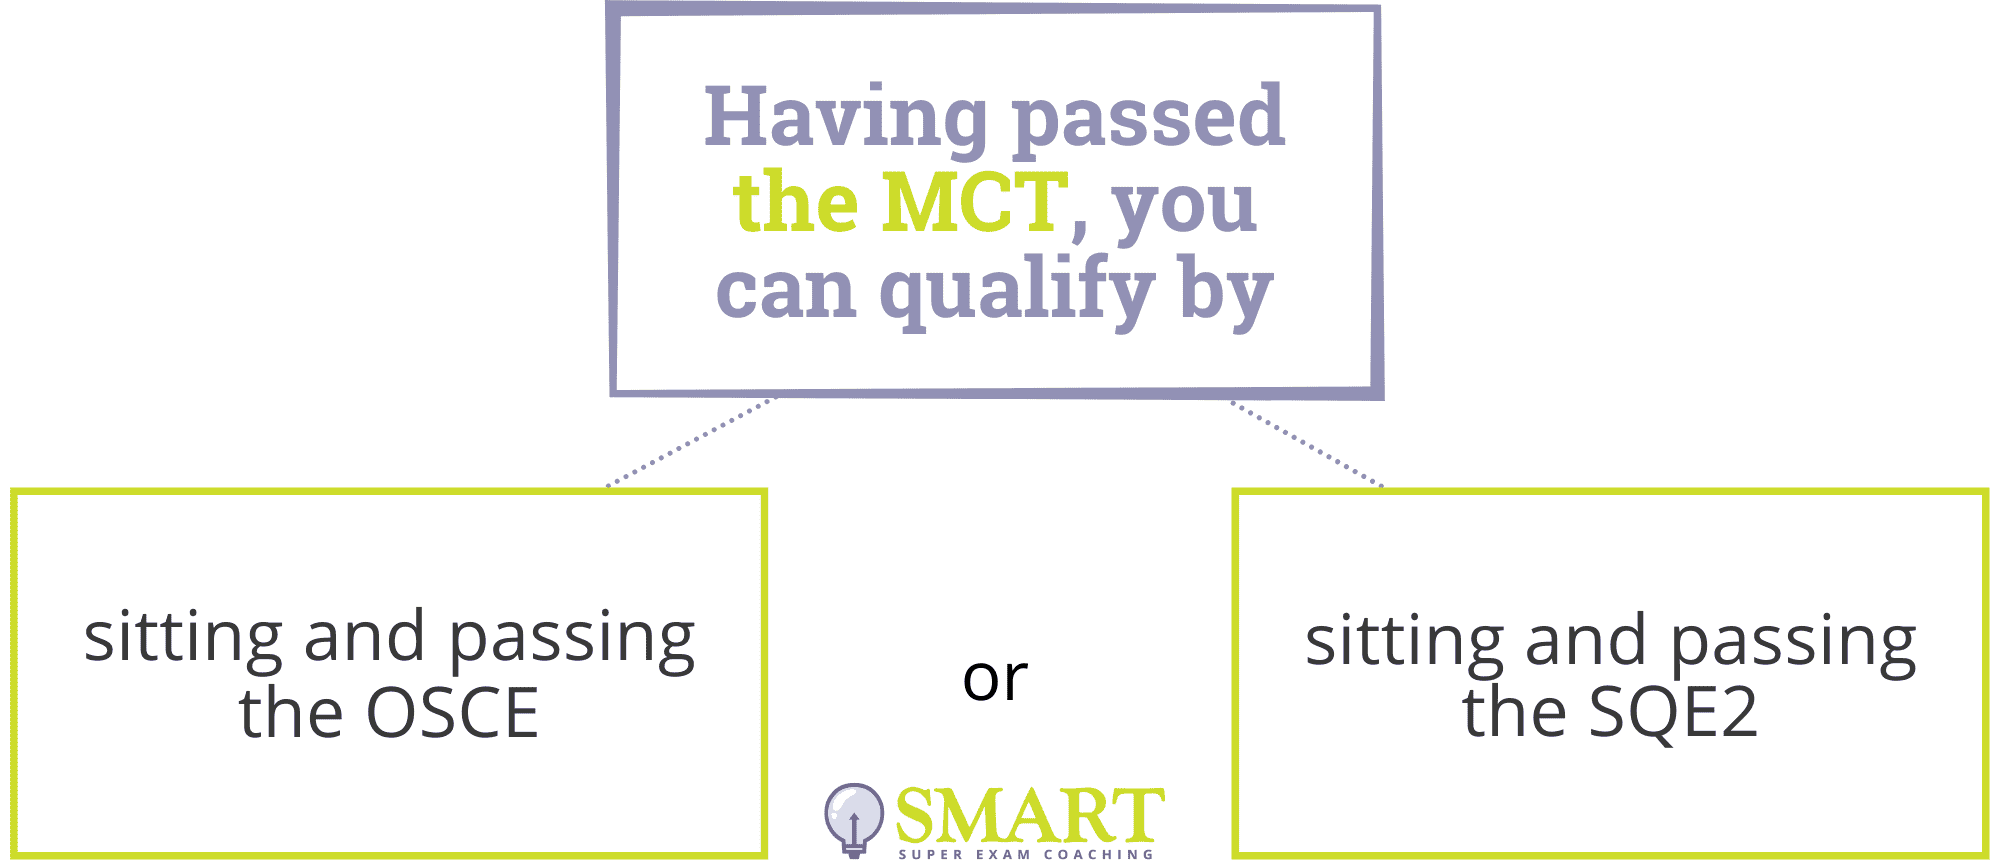 Qualification after passing the MCT